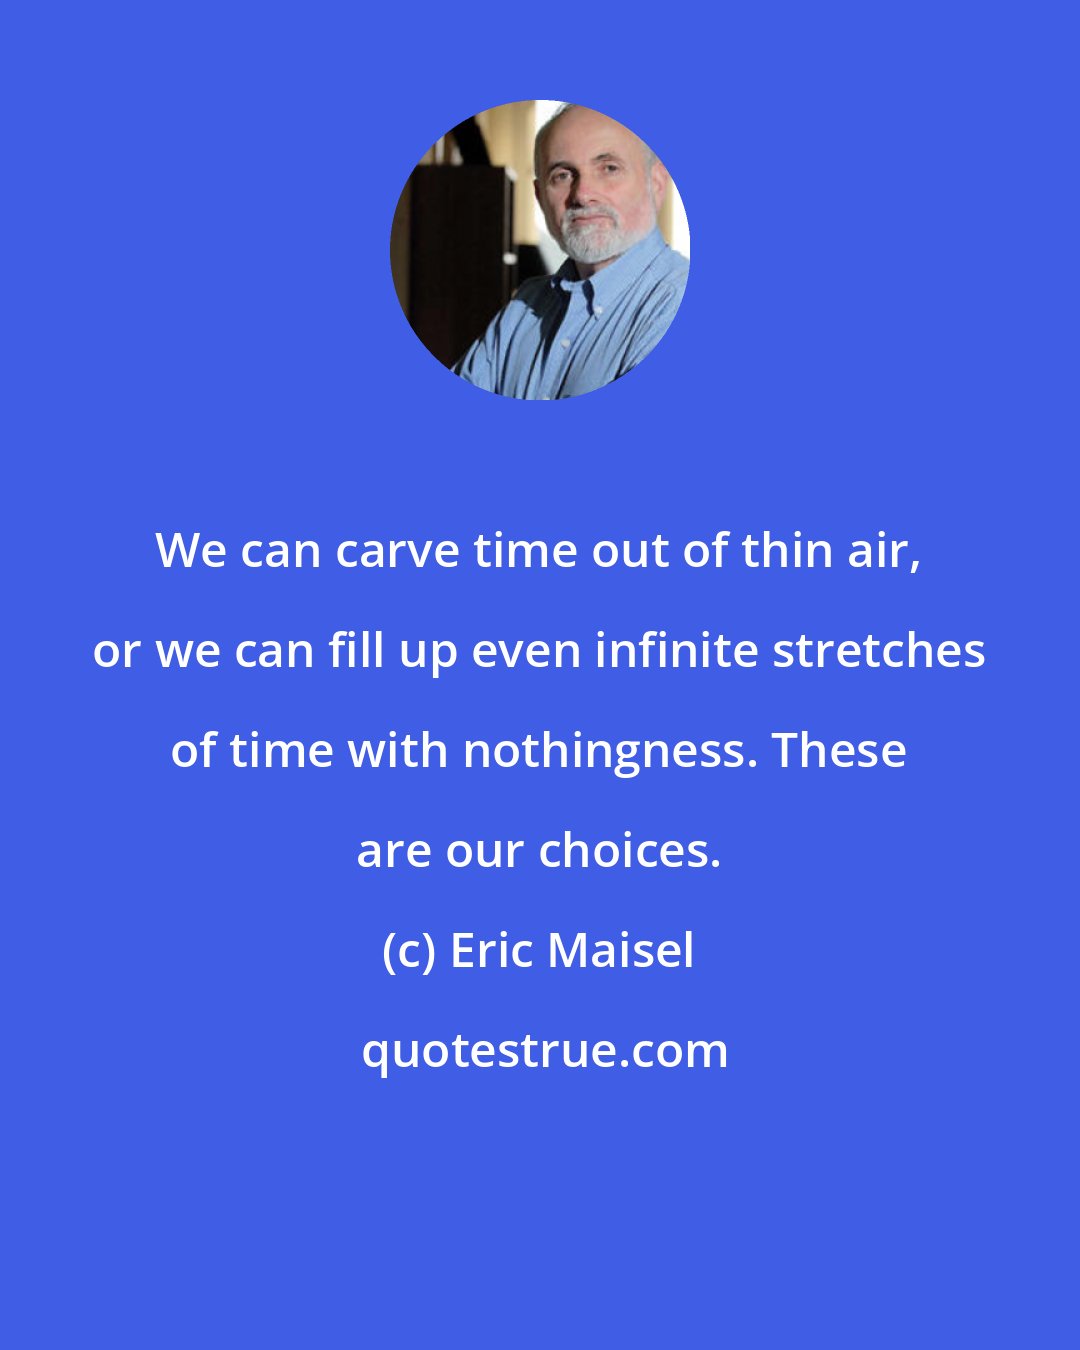 Eric Maisel: We can carve time out of thin air, or we can fill up even infinite stretches of time with nothingness. These are our choices.